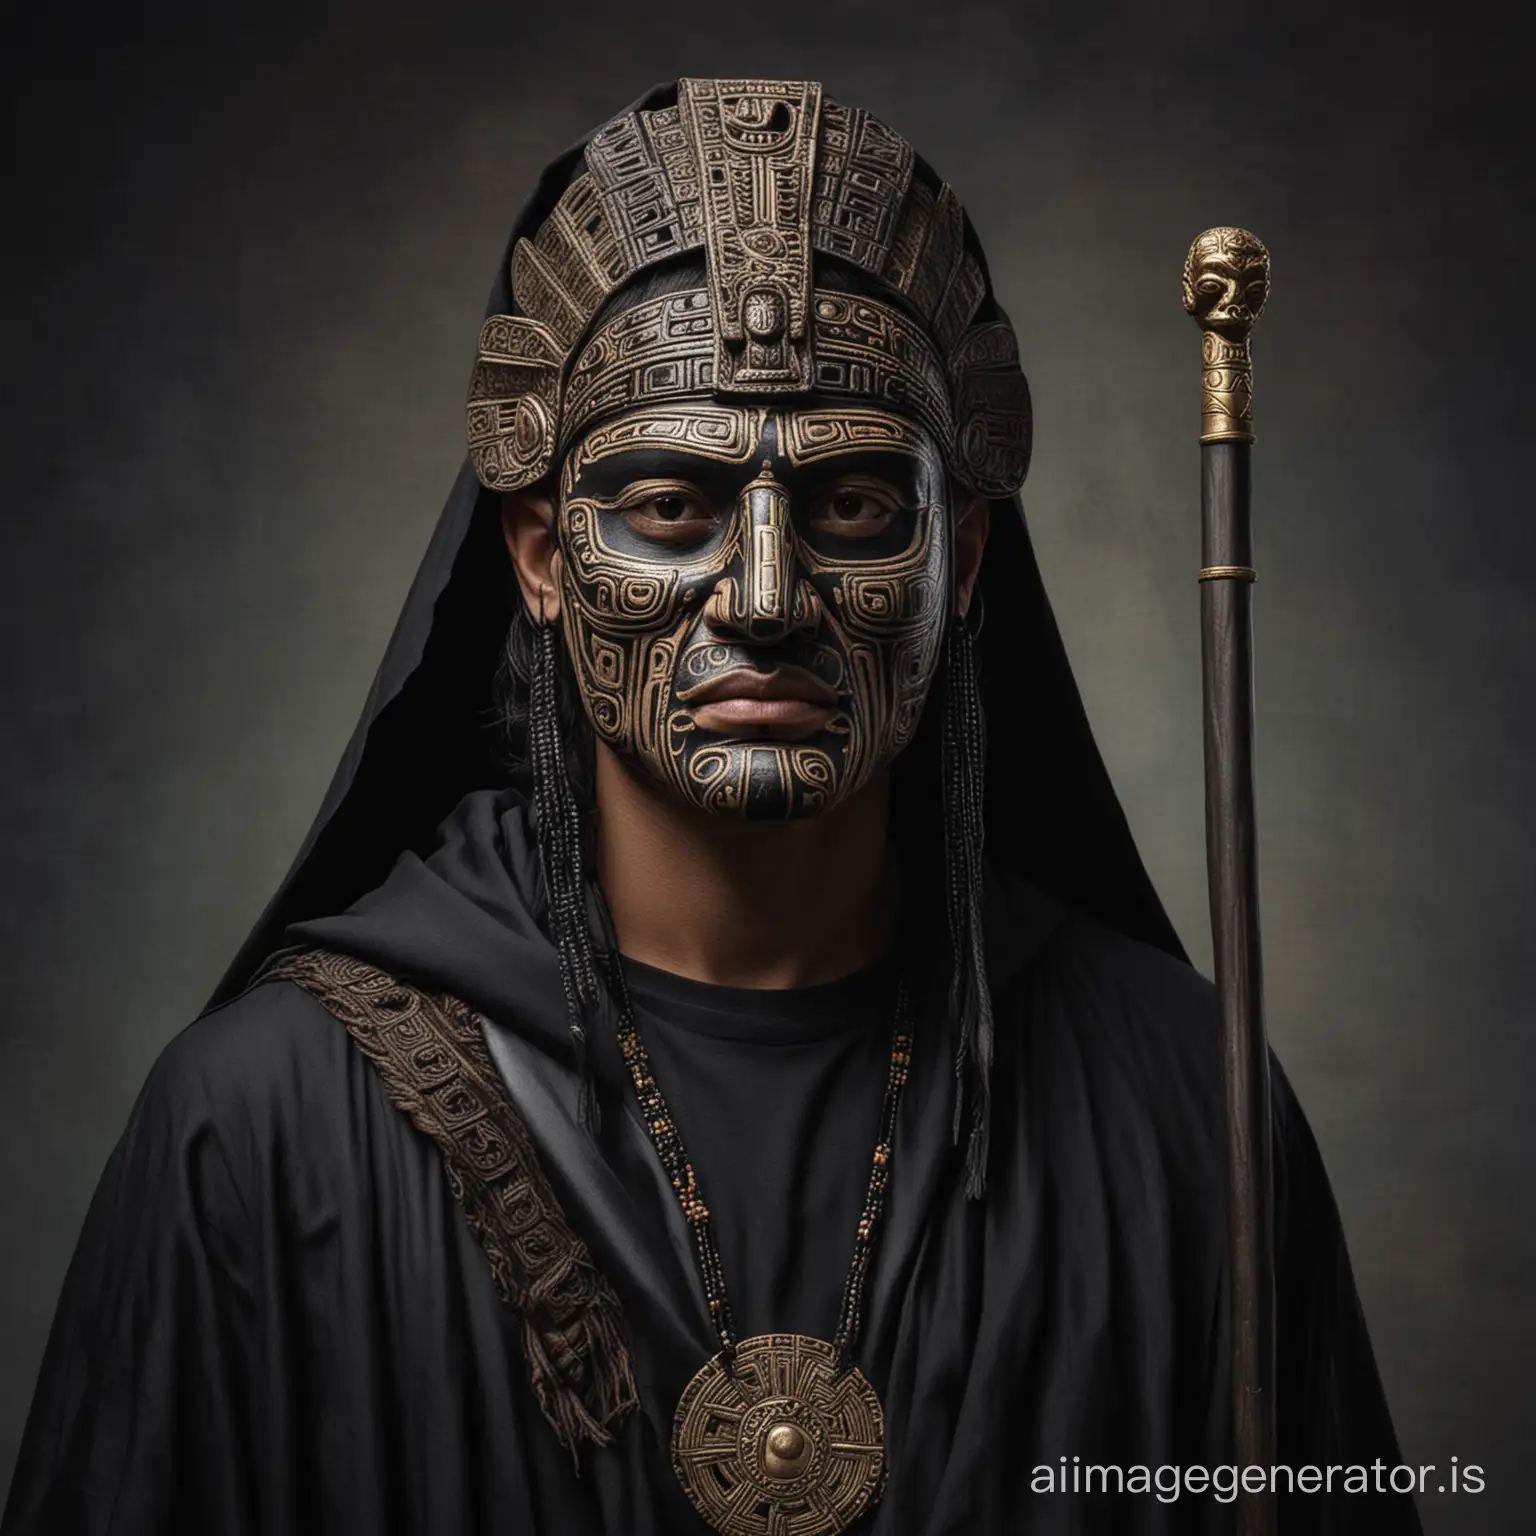 Mysterious-Man-with-Black-Cloak-and-Mayan-Mask-Holding-Cane